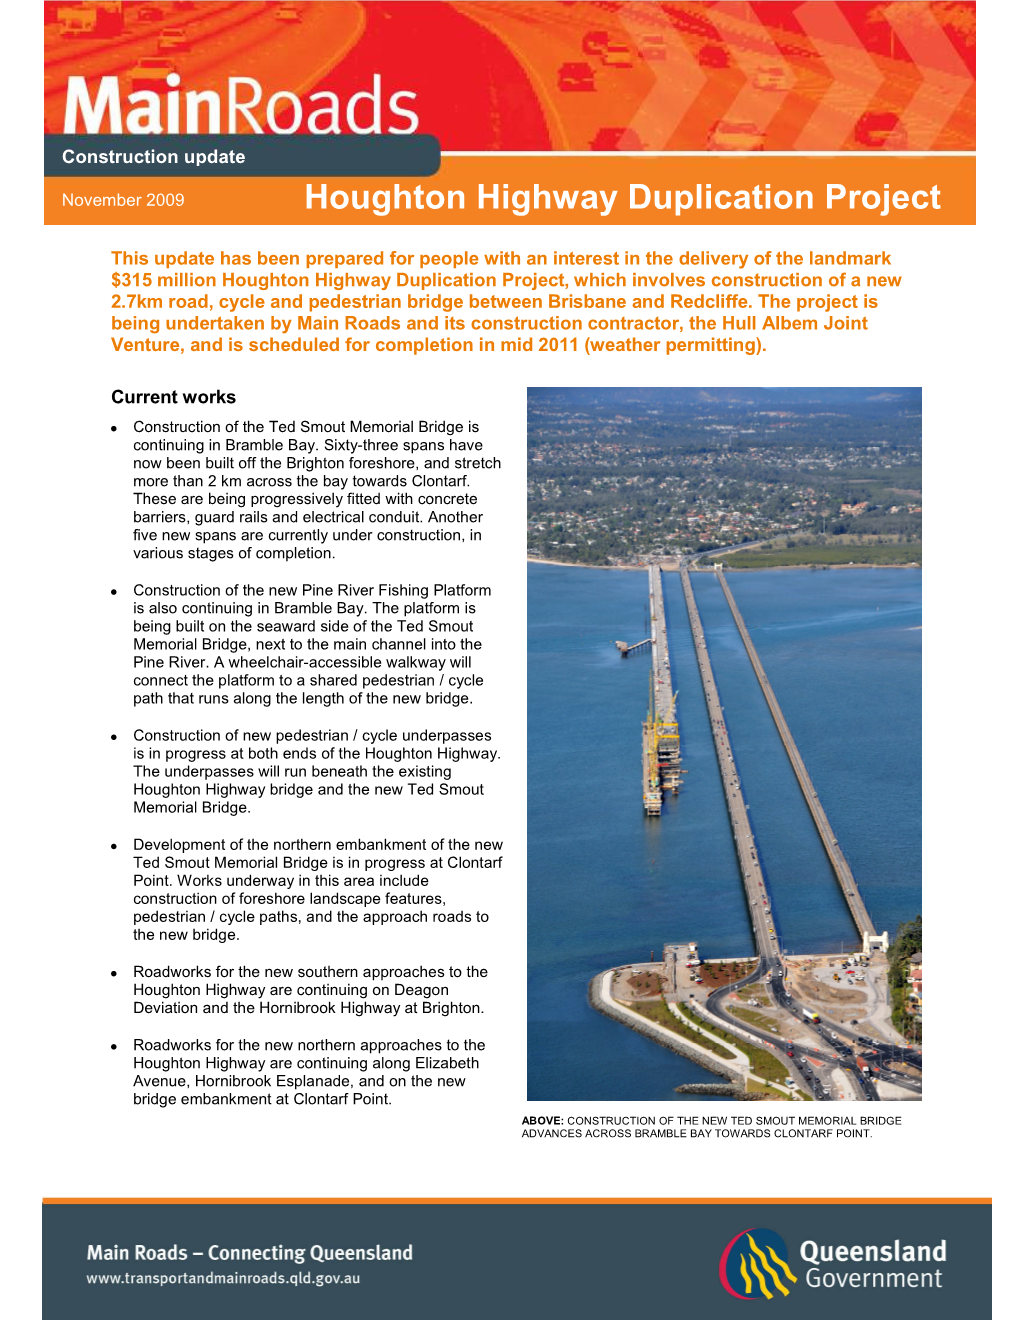 Houghton Highway Duplication Project